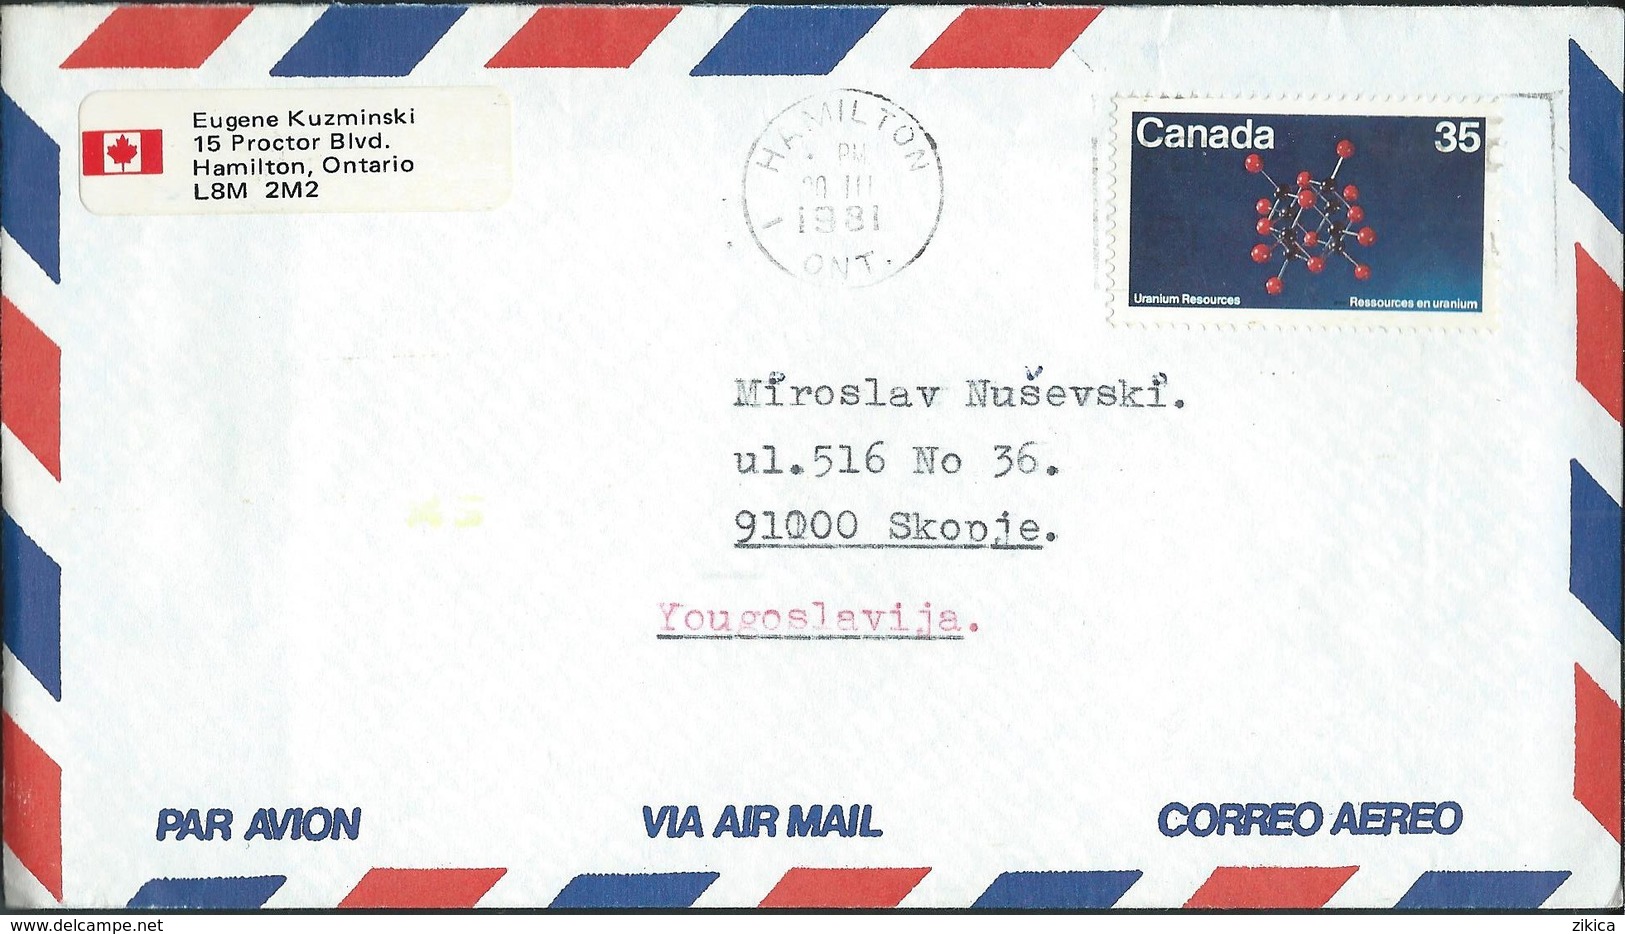 Canada Letter Via Yugoslavia 1981 - Motive Stamps : 1980 Uranium Resources,	Geology/Minerals - Covers & Documents